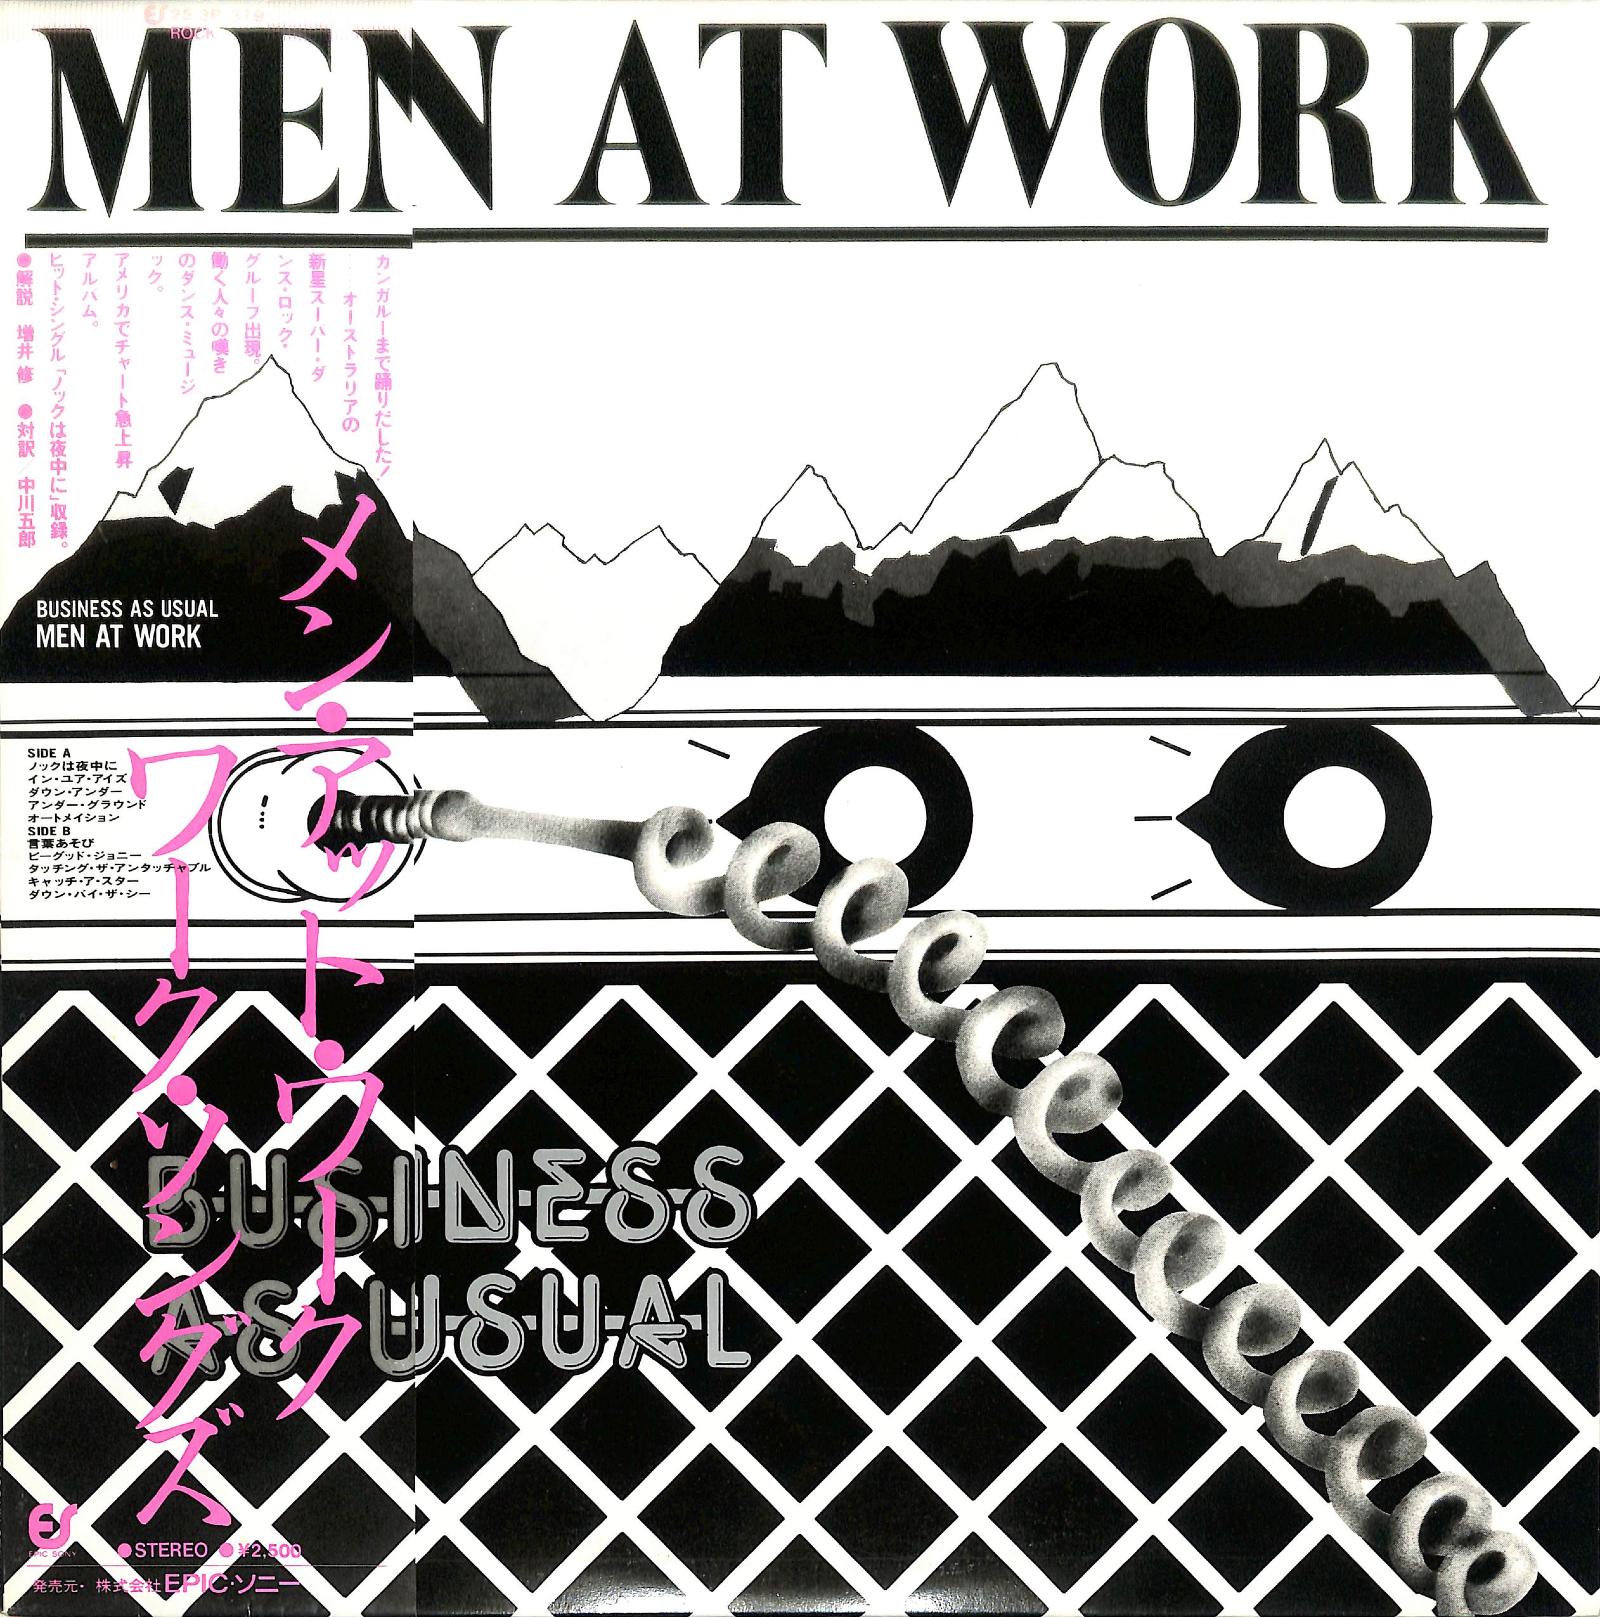 MEN AT WORK - Business As Usual